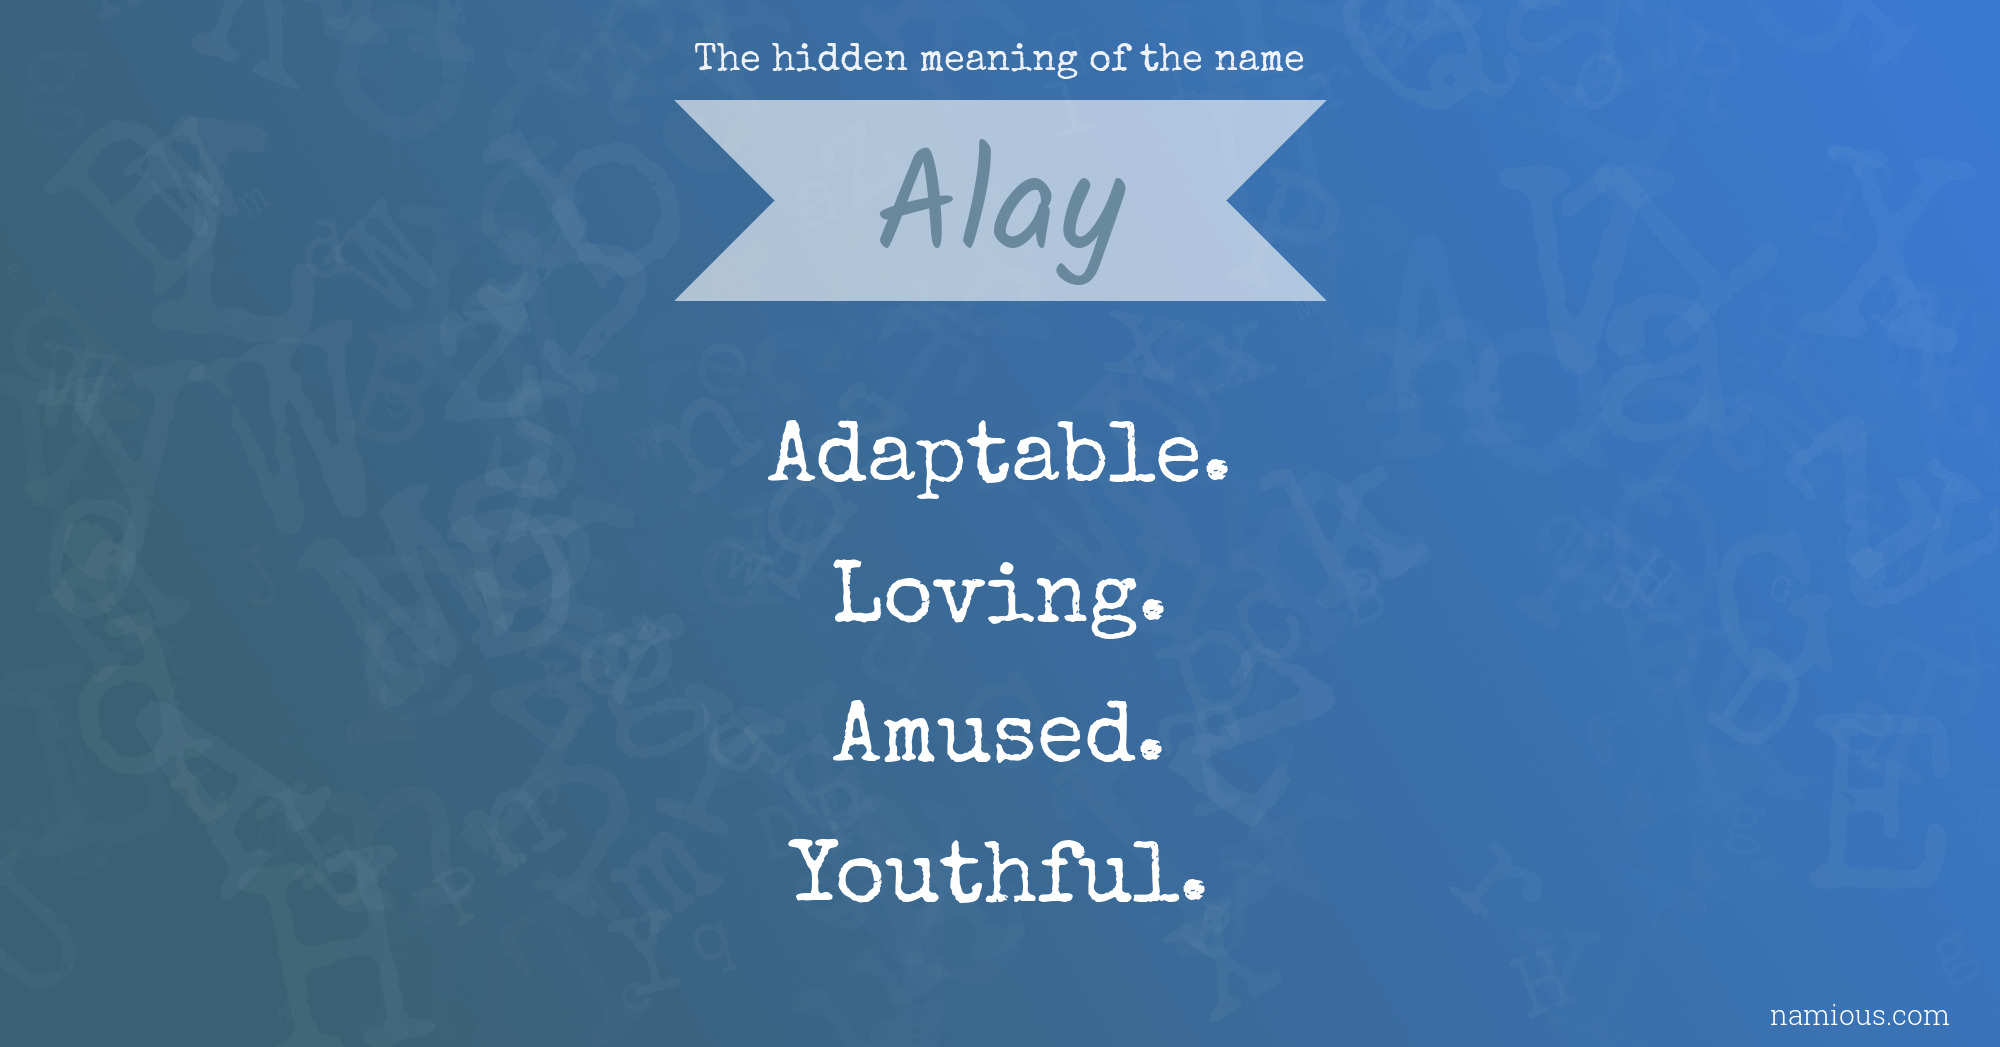 The hidden meaning of the name Alay